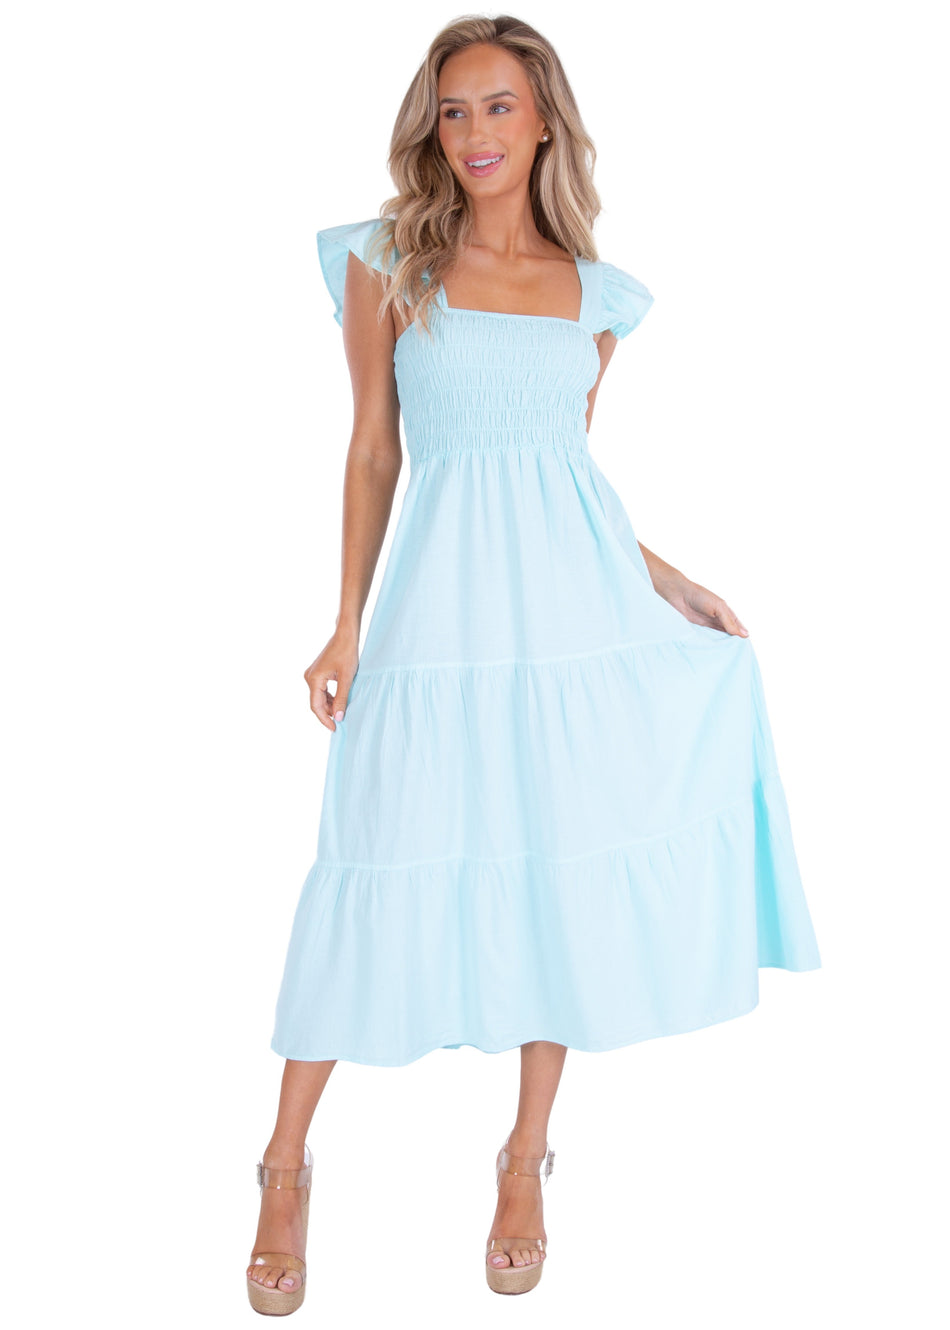 NW1539 - Baby Turquoise Cotton Dress